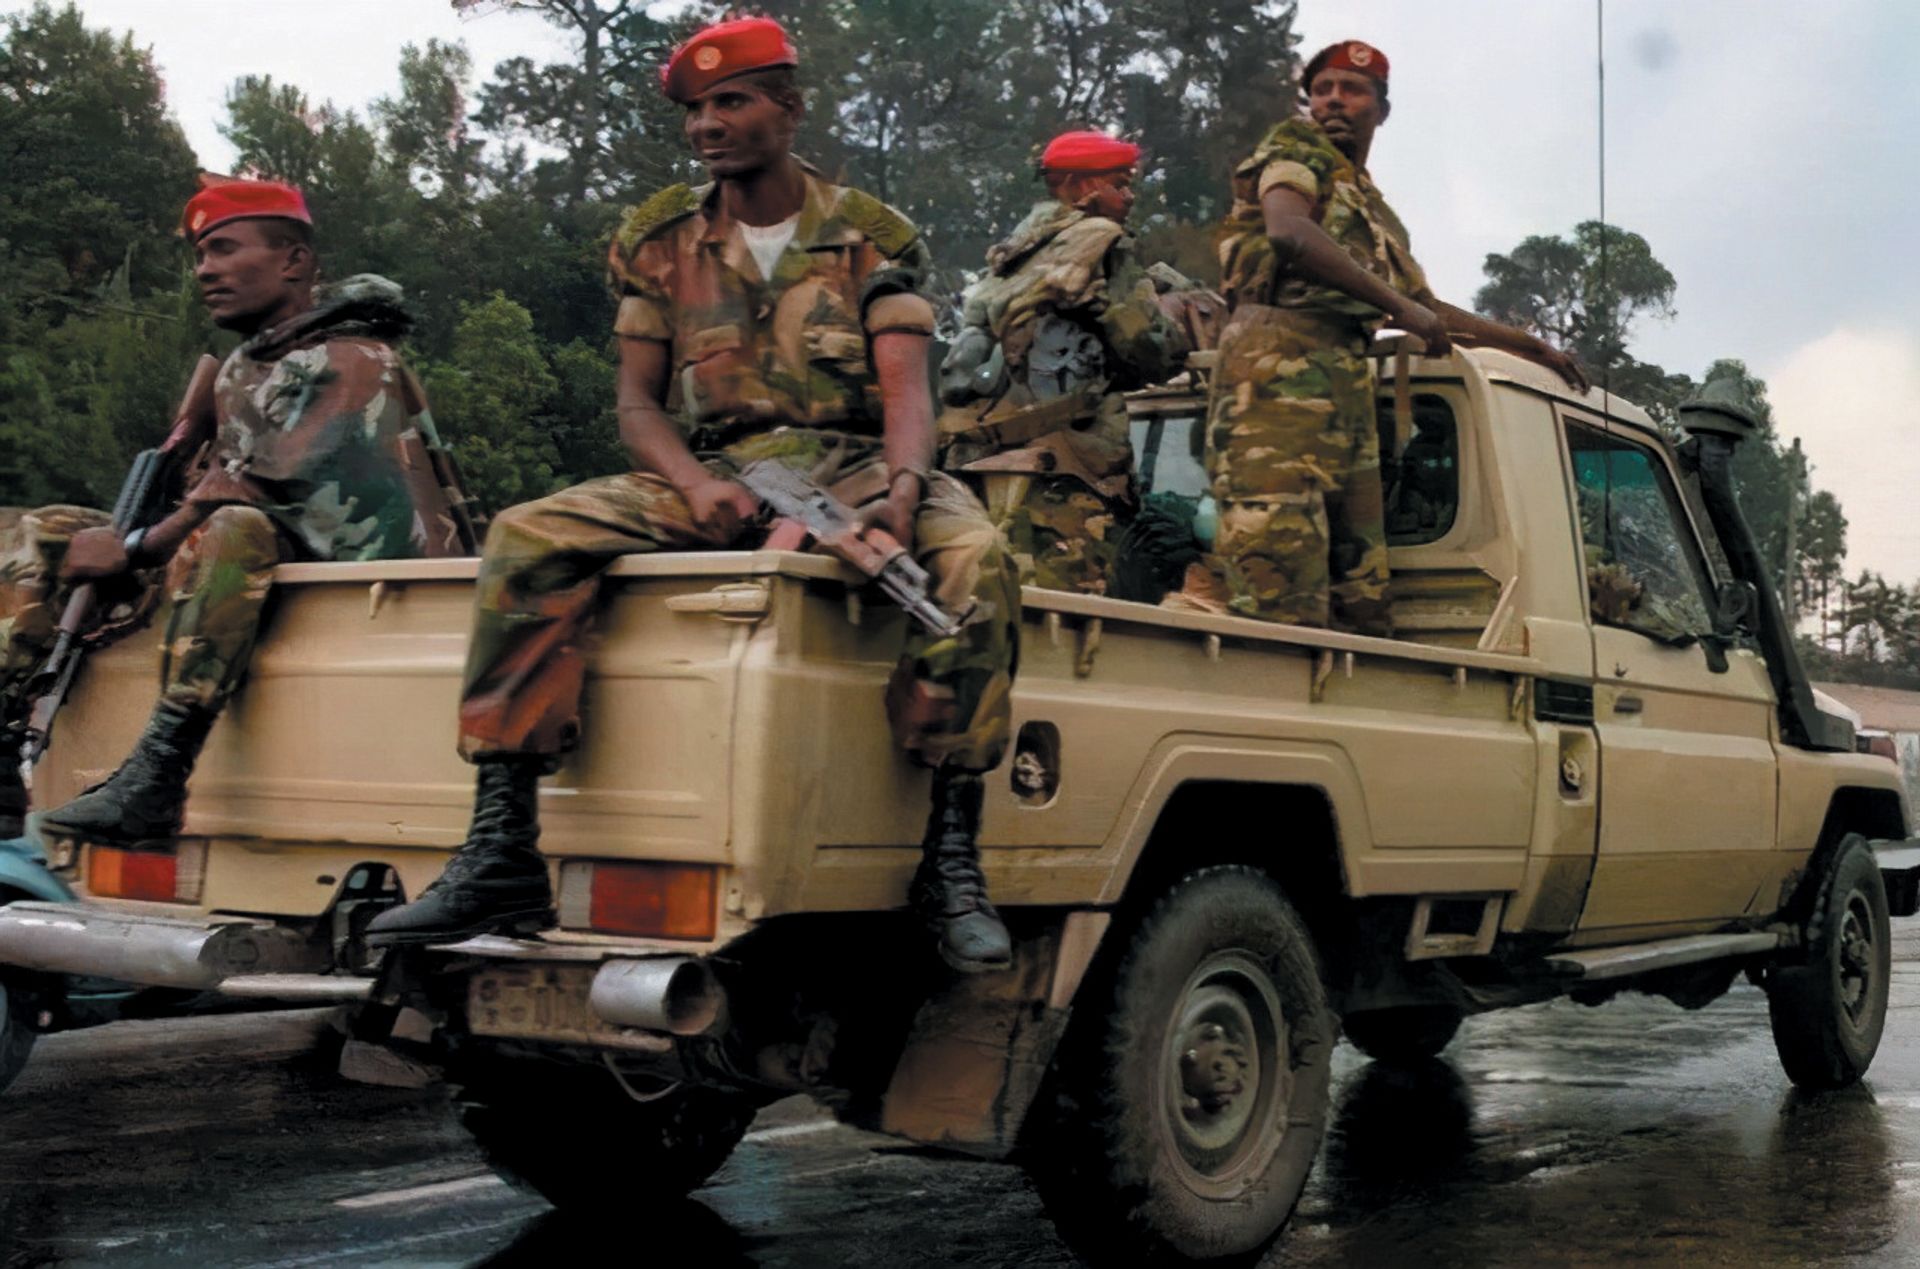 Ethiopian troops in the Tigray region Photo: Image Professionals GmbH/Alamy Stock Photo.